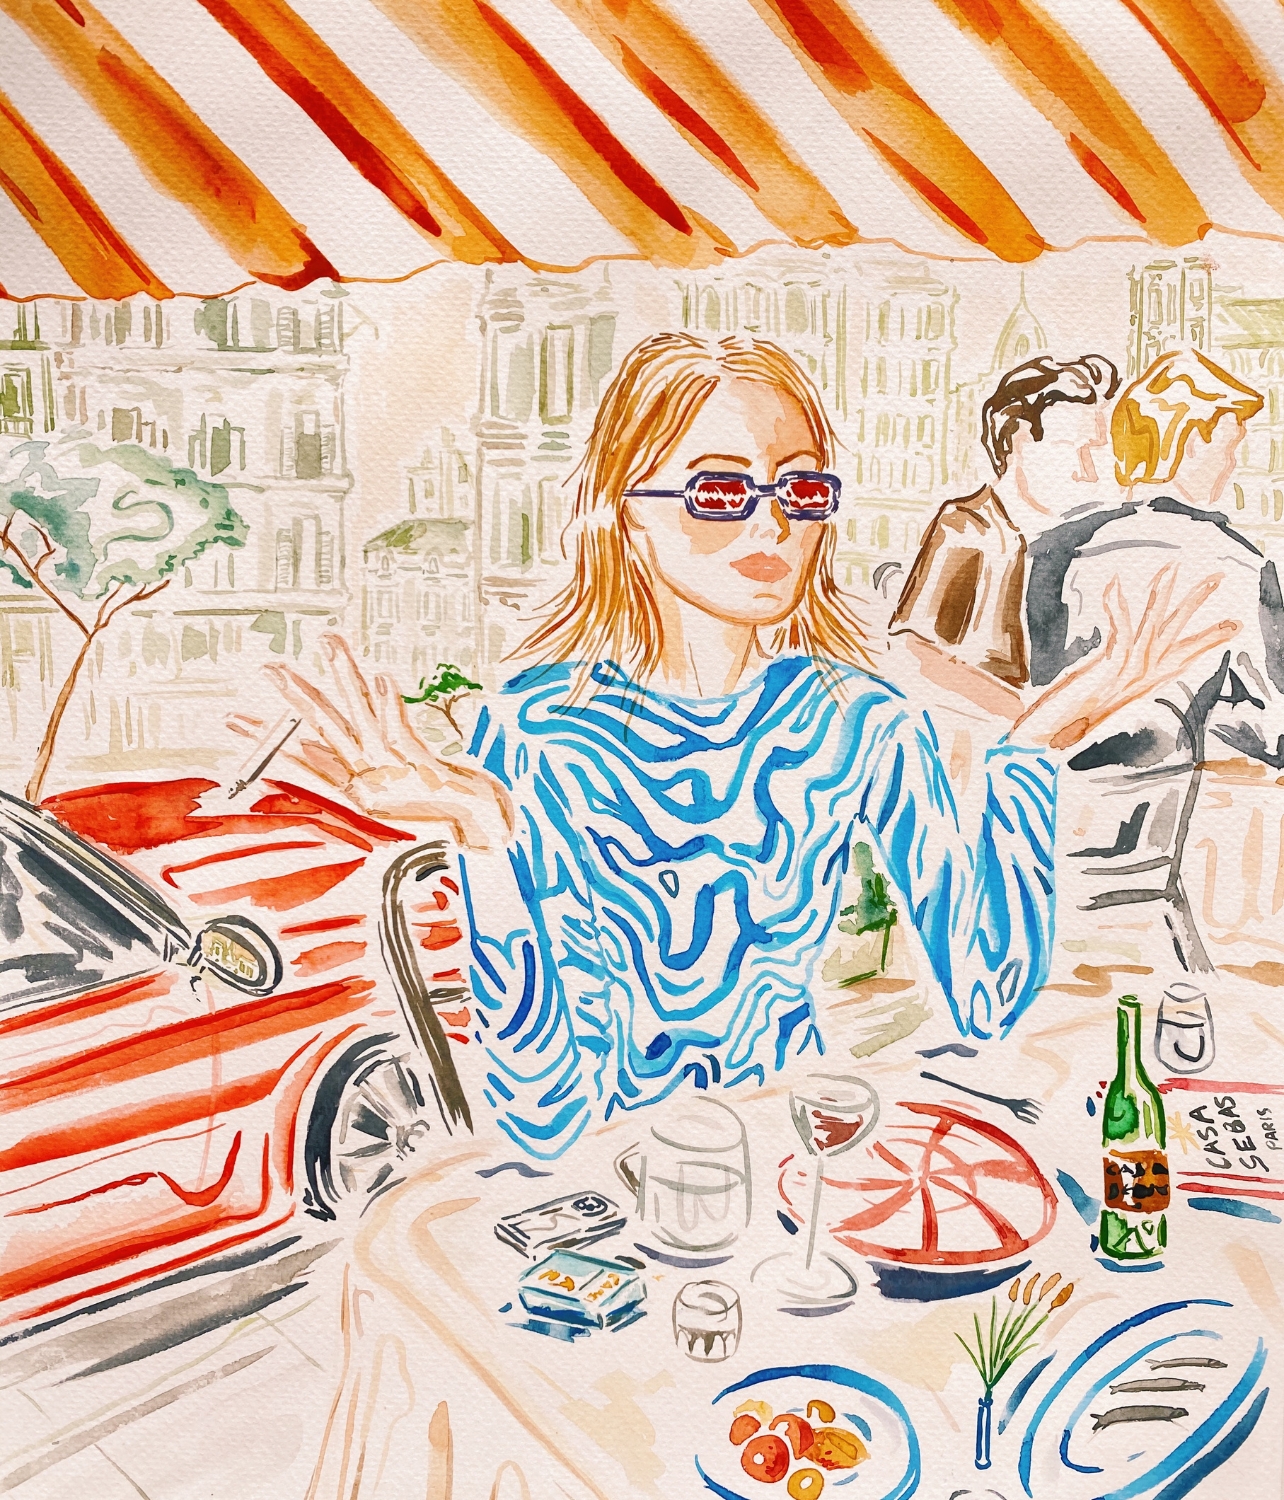 Illustration of woman enjoying hors d’oeuvres, wine, and a cigarette in Paris by Sebastian Marc Graham